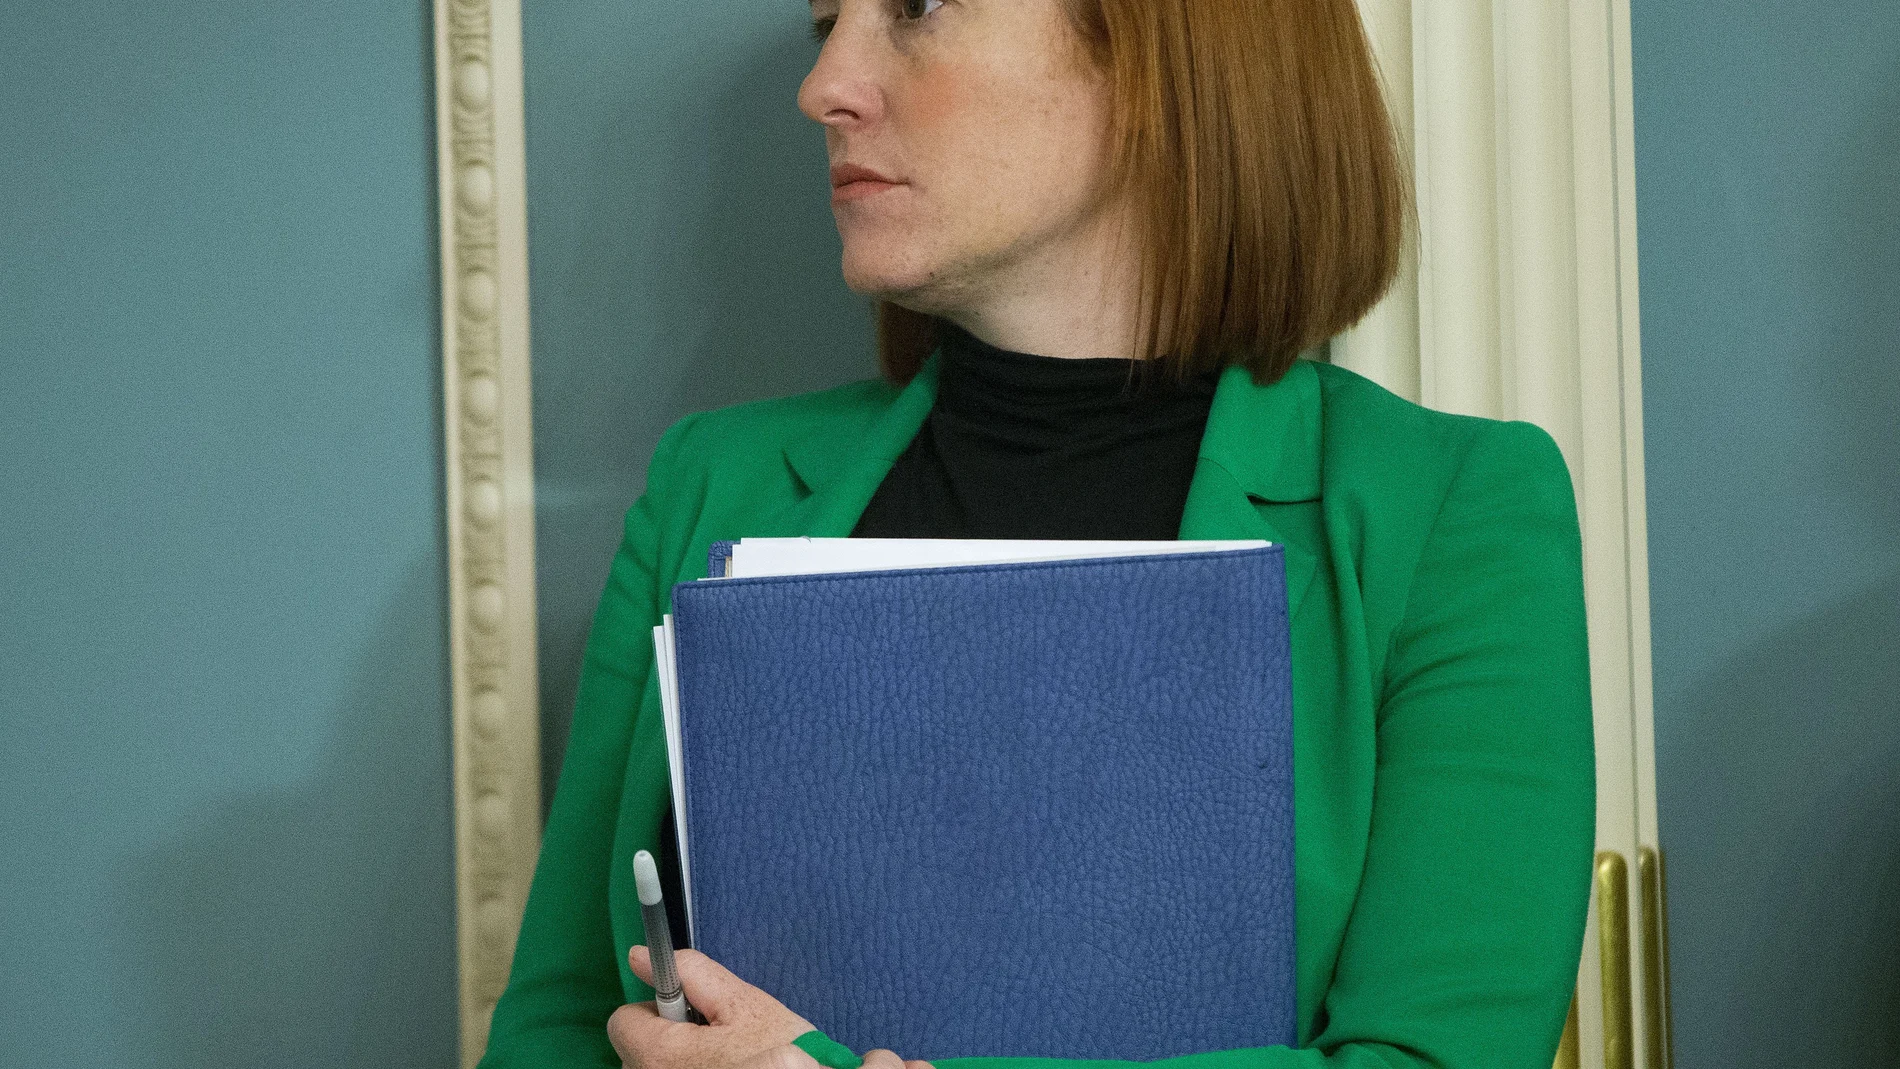 State Department spokeswoman Jen Psaki stands in on a meeting in Washington, Friday, Feb. 27, 2015. President-elect Joe Biden will have an all-female communications team at his White House, led by campaign communications director Kate Bedingfield. Jen Psaki will be his press secretary. (AP Photo/Pablo Martinez Monsivais)